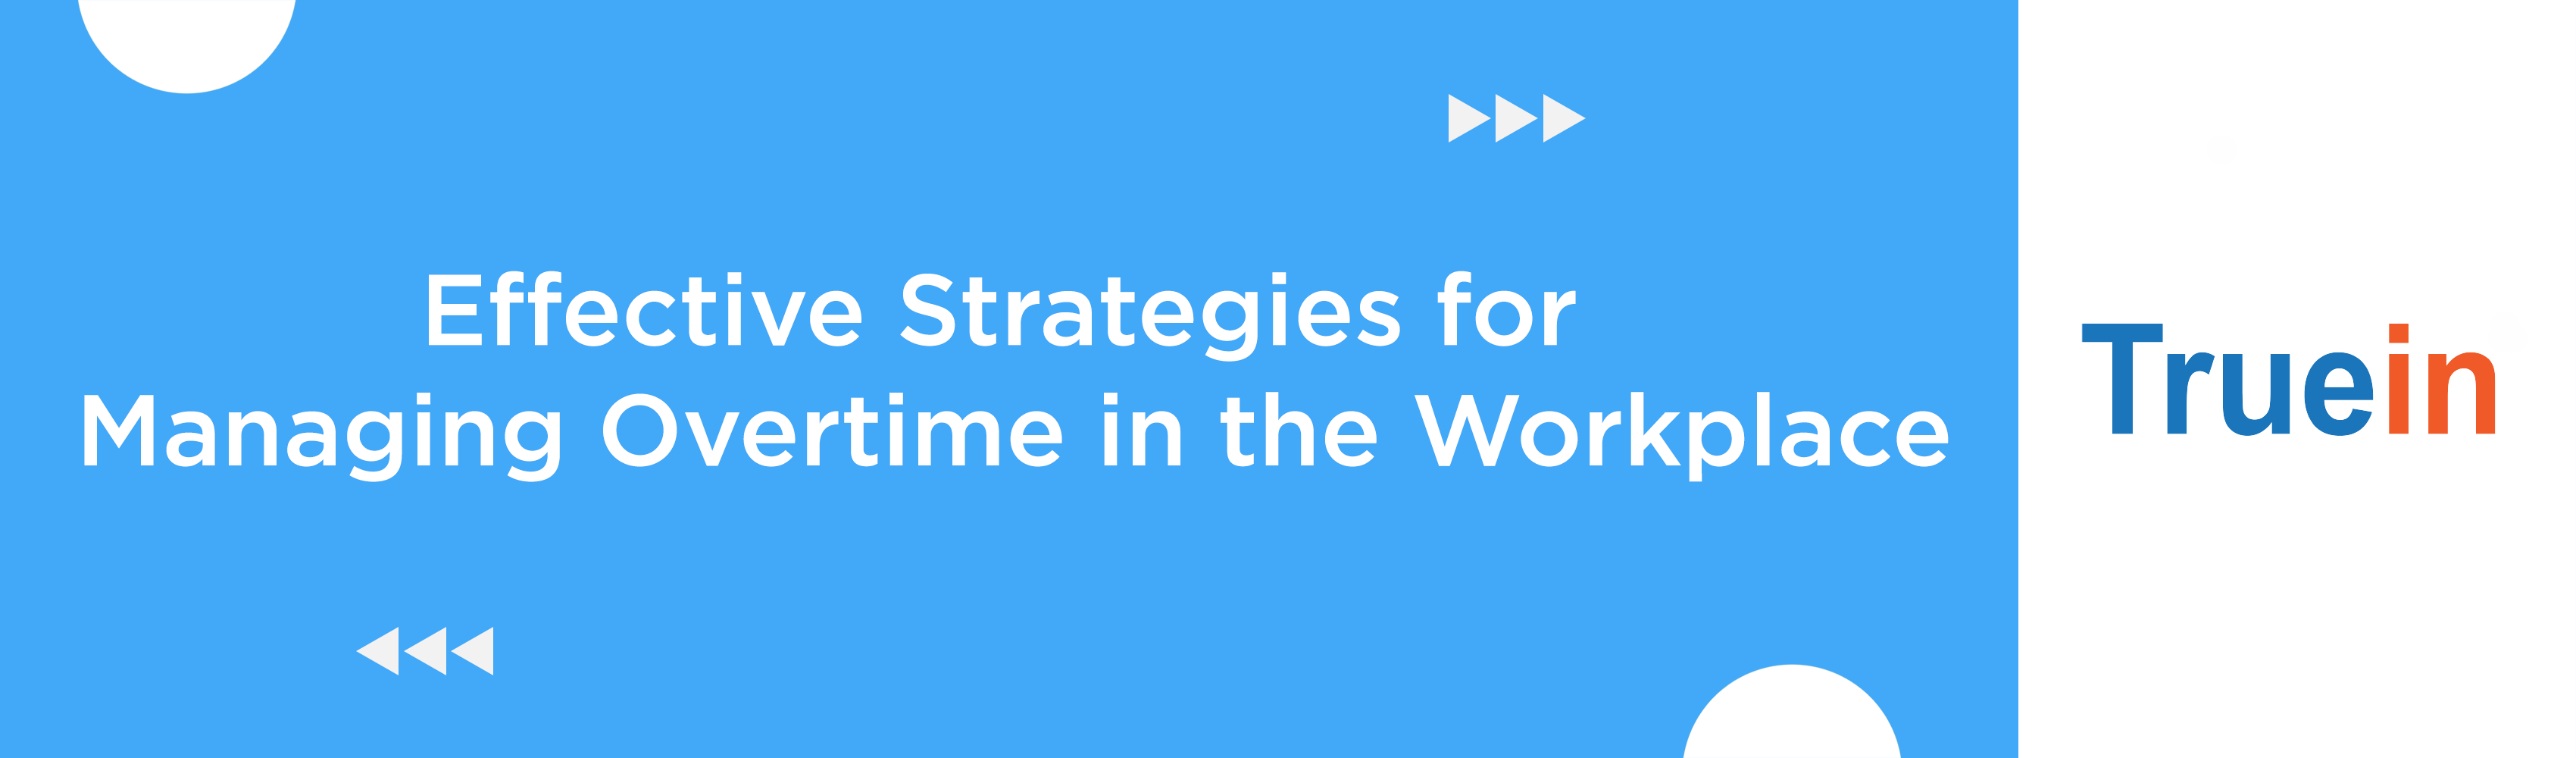 Effective Strategies for Managing Overtime in the Workplace